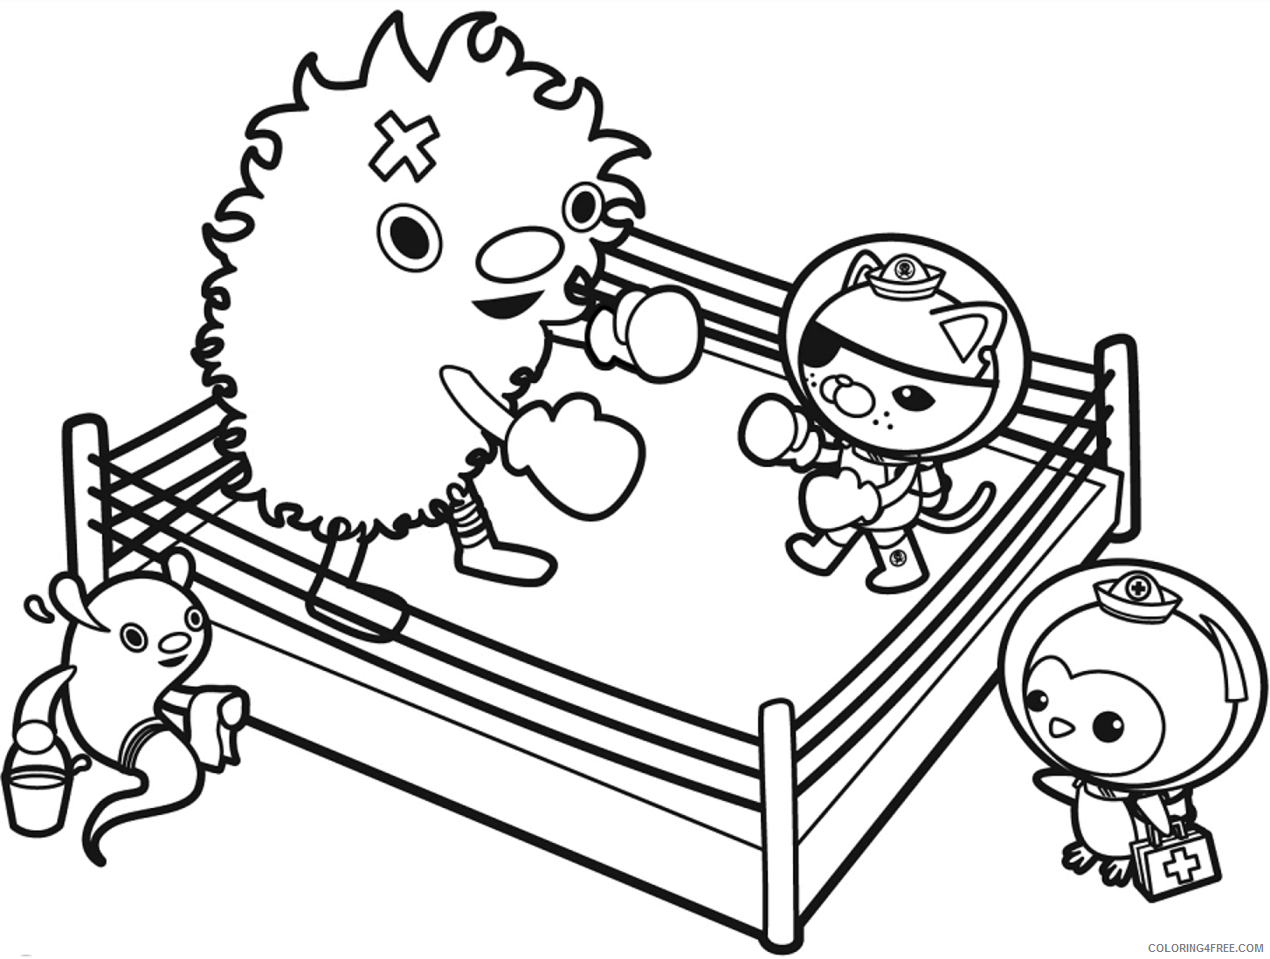 The Octonauts Coloring Pages TV Film boxing Printable 2020 09406 Coloring4free